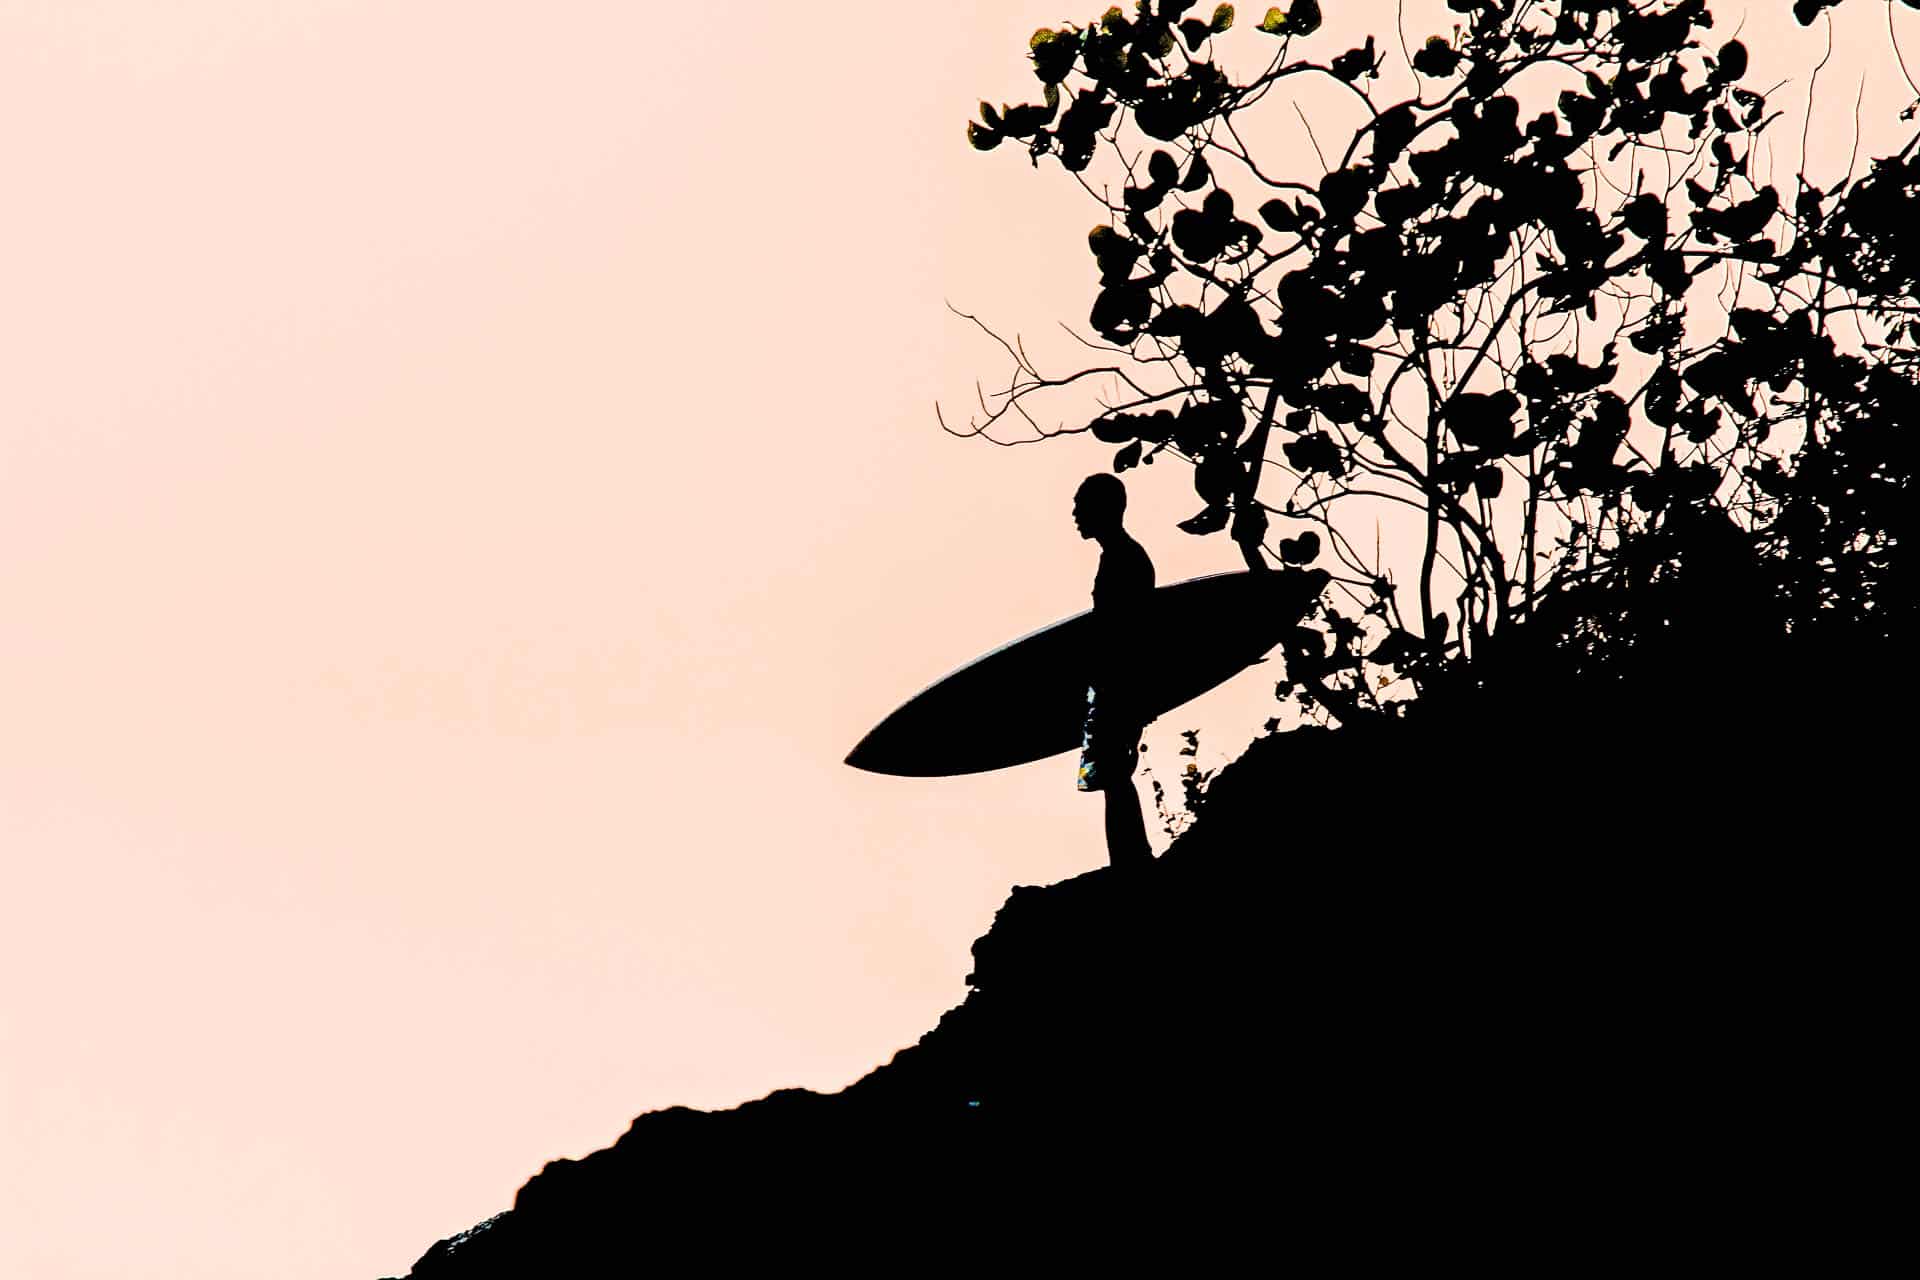 Silhoutte of person standing on a hill with a surfboard in hand